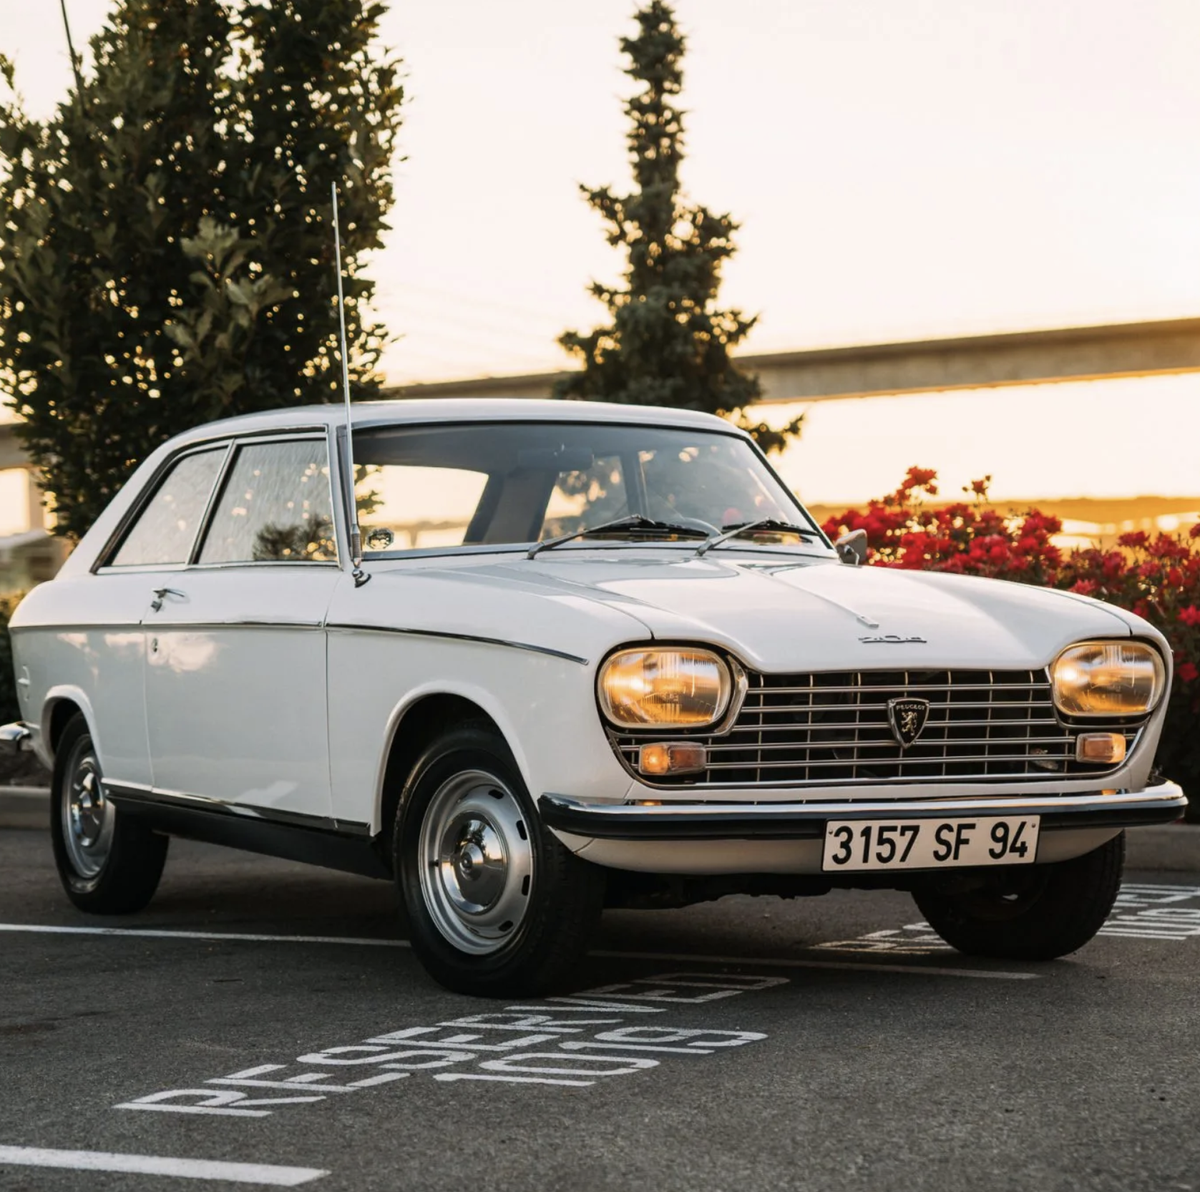 This 1968 Peugeot 204 Coupe Is Our Bring a Trailer Auction Pick